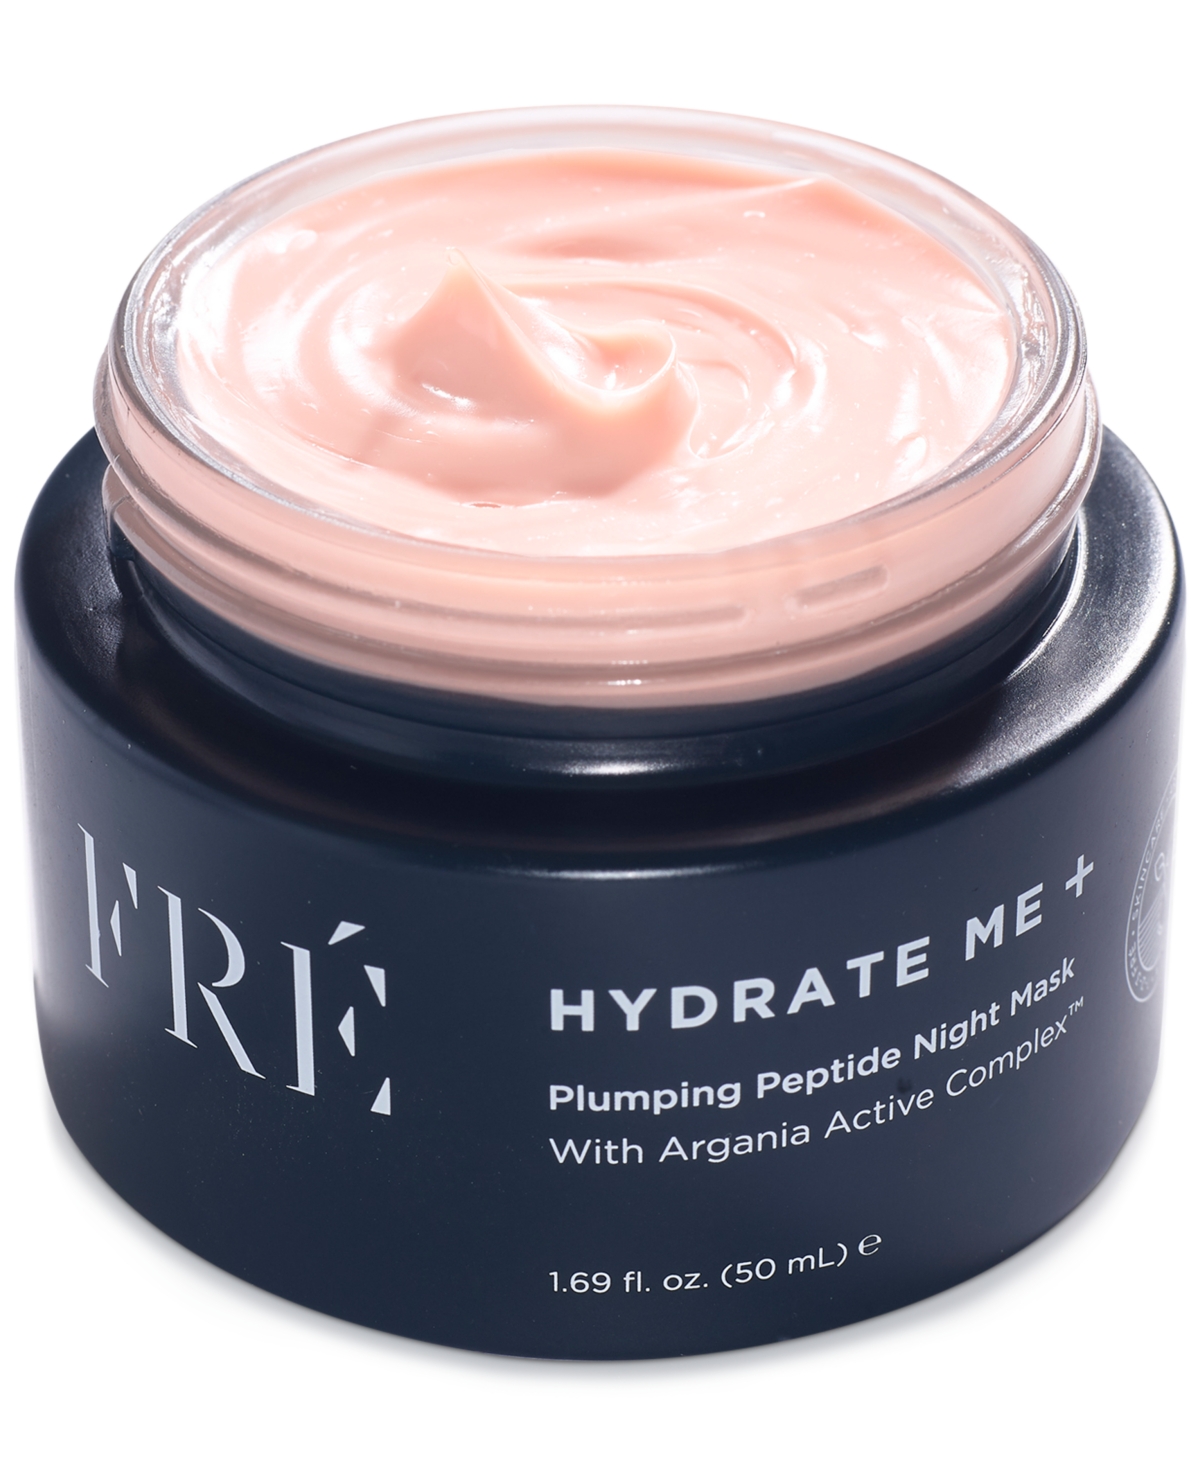 Shop Fre Hydrate Me + Plumping Peptide Night Mask In Light Pink